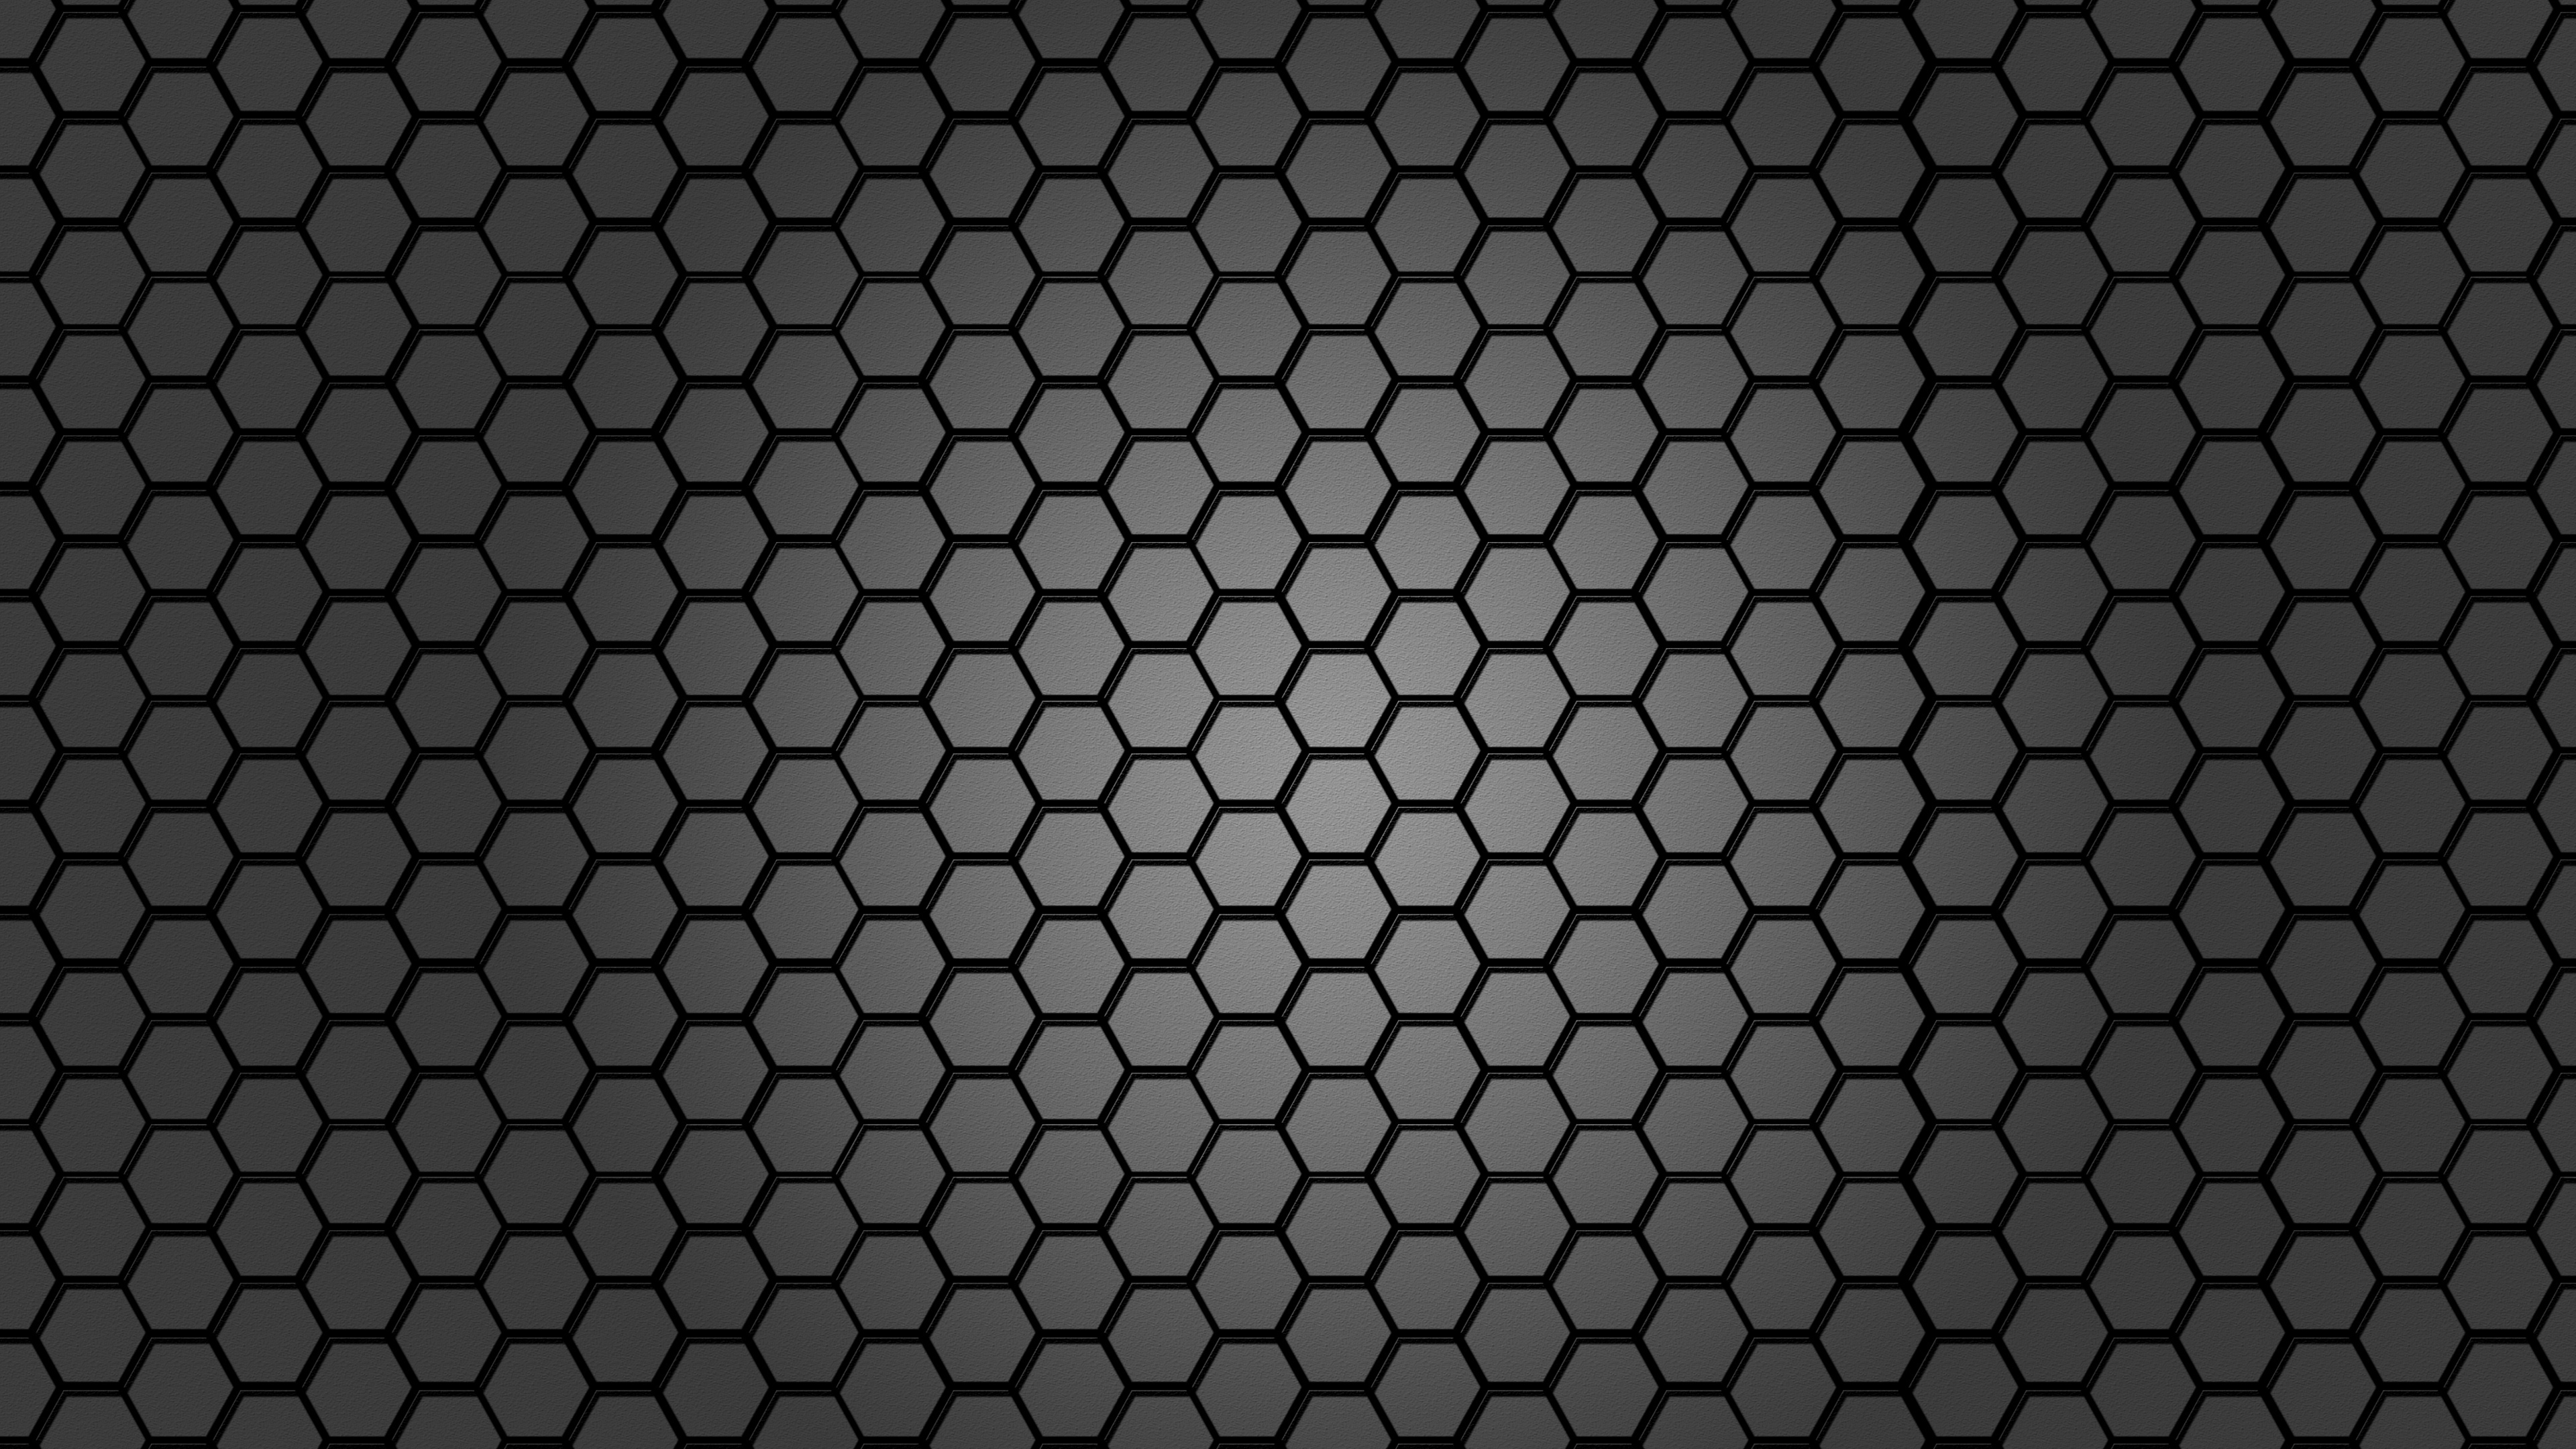 Wallpaper ID 9462  hexagons structure geometric 3d relief 4k free  download